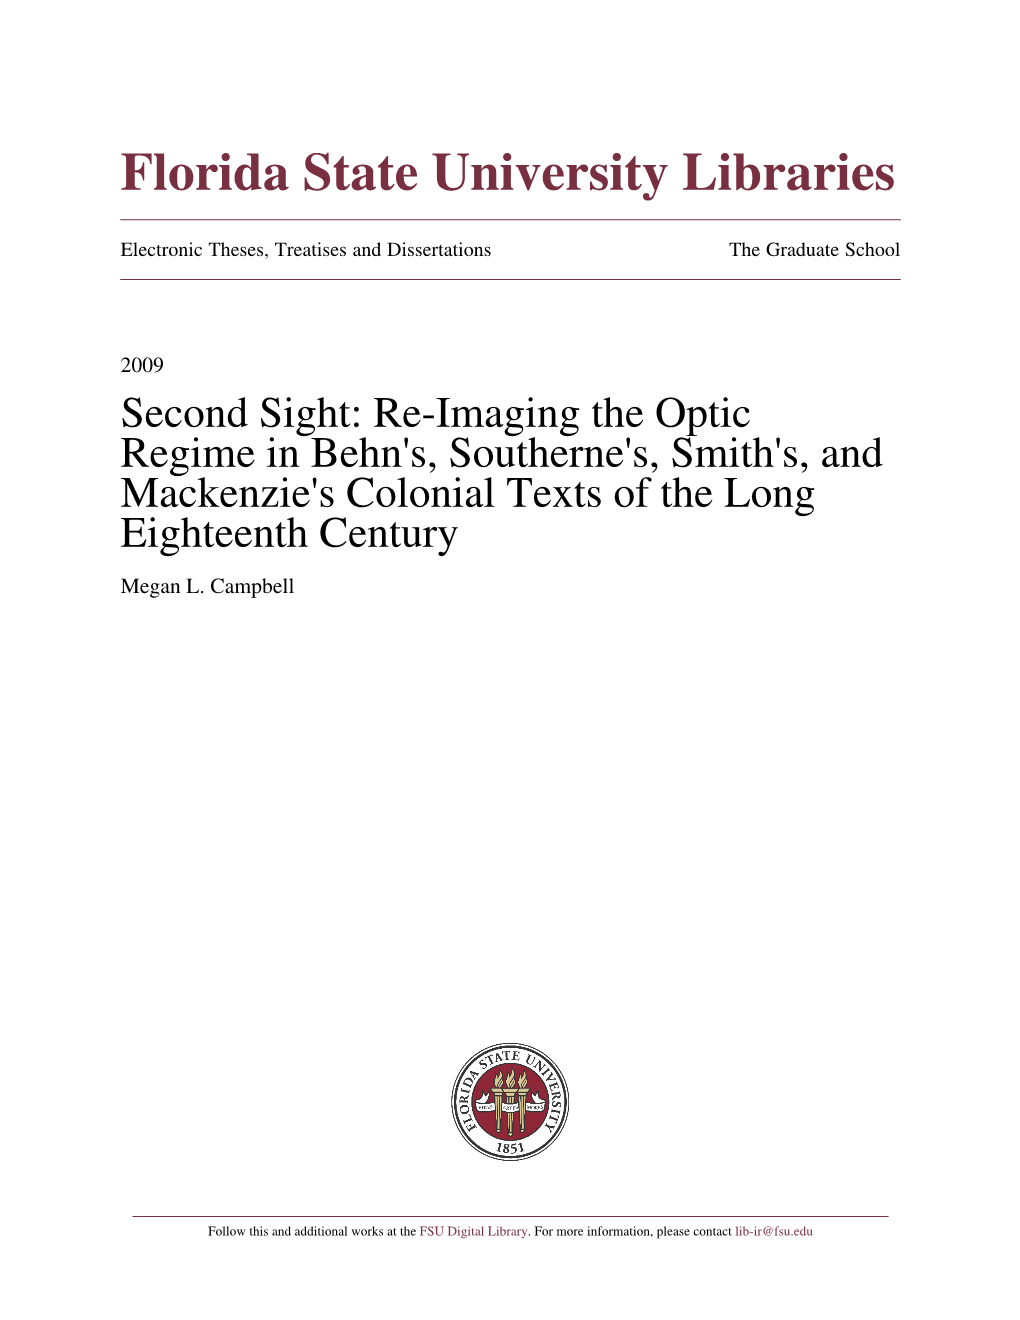 Second Sight: Re-Imaging the Optic Regime in Behn's, Southerne's, Smith's, and Mackenzie's Colonial Texts of the Long Eighteenth Century Megan L